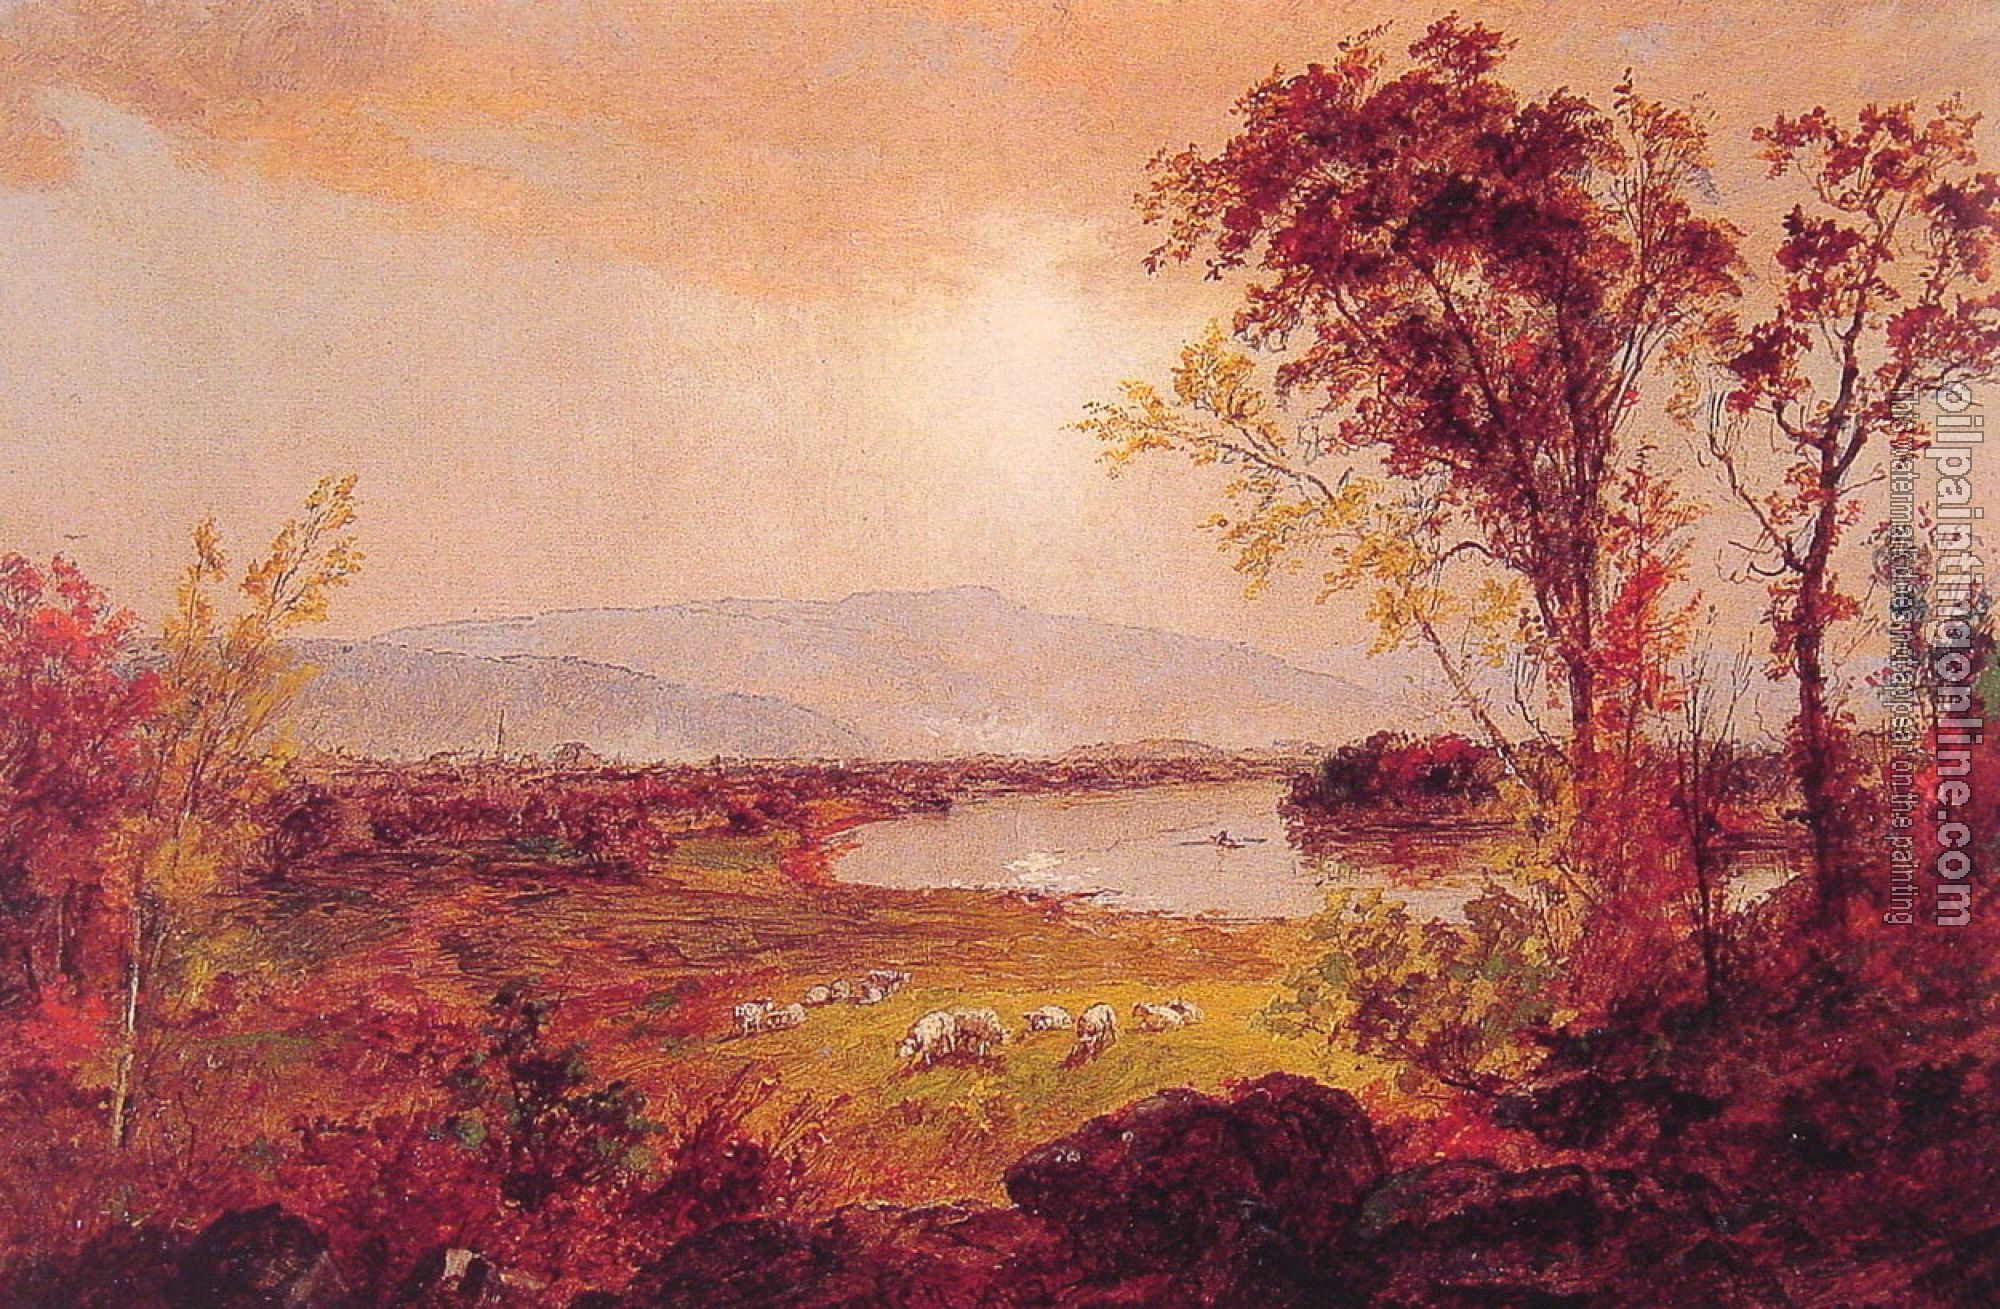 Jasper Francis Cropsey - A Bend in the River